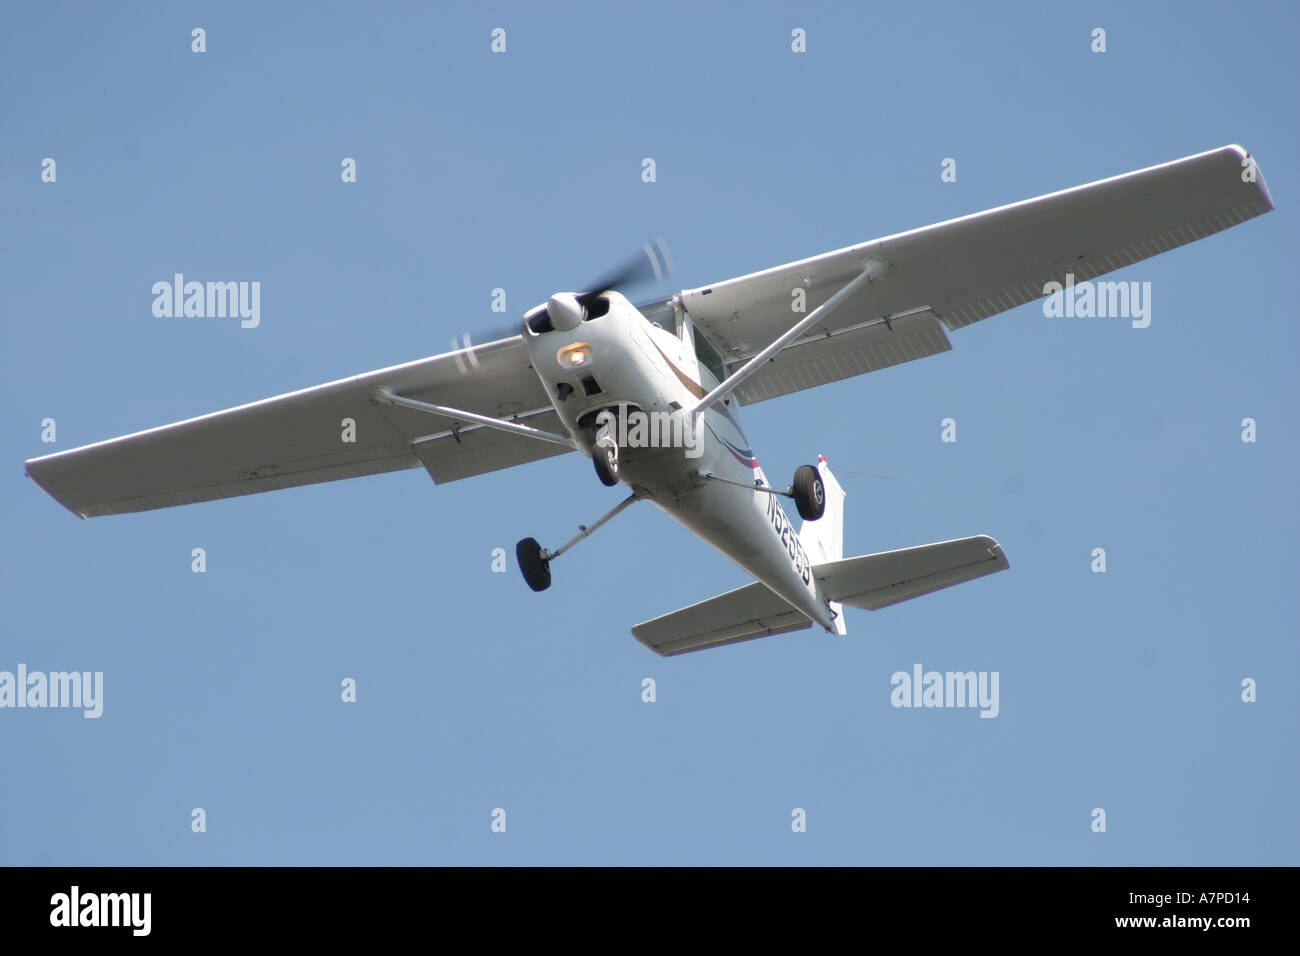 Florida Pinellas County,St. Petersburg,Tampa Bay water inlet,single engine,motor,commercial airliner airplane plane aircraft aeroplane,plane,aircraft, Stock Photo